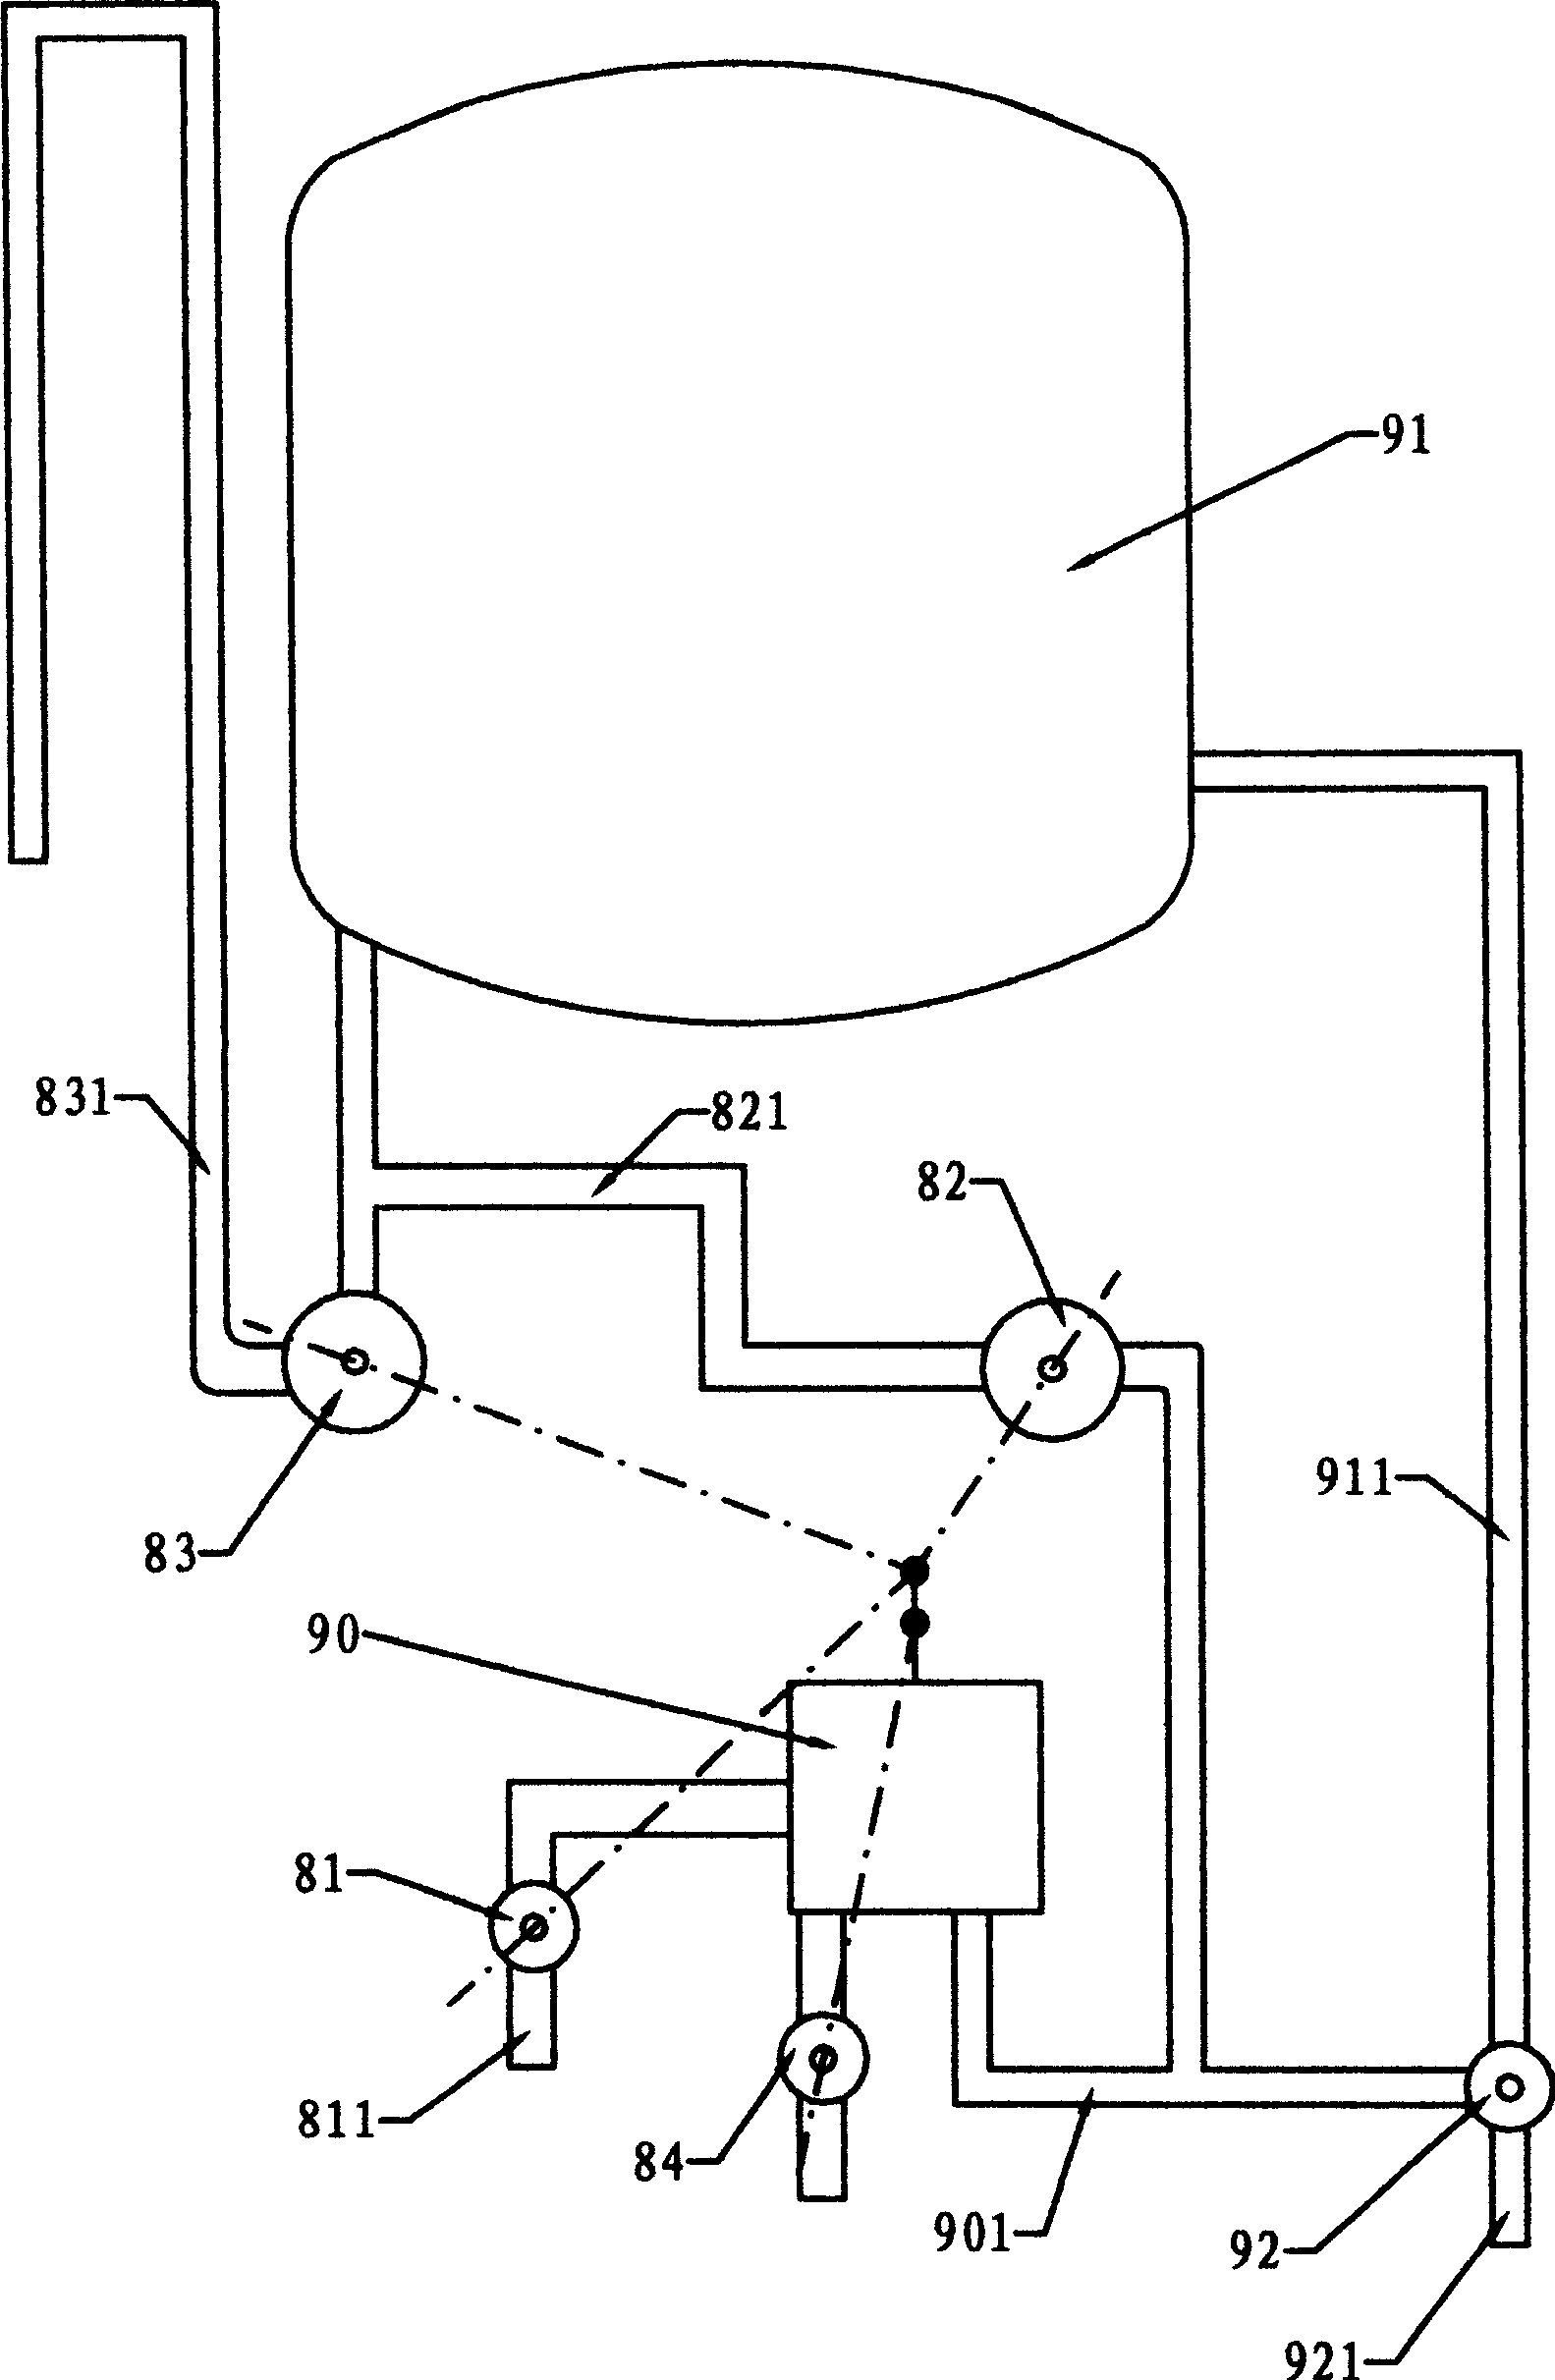 Water flow automatic control method for mixed water heater